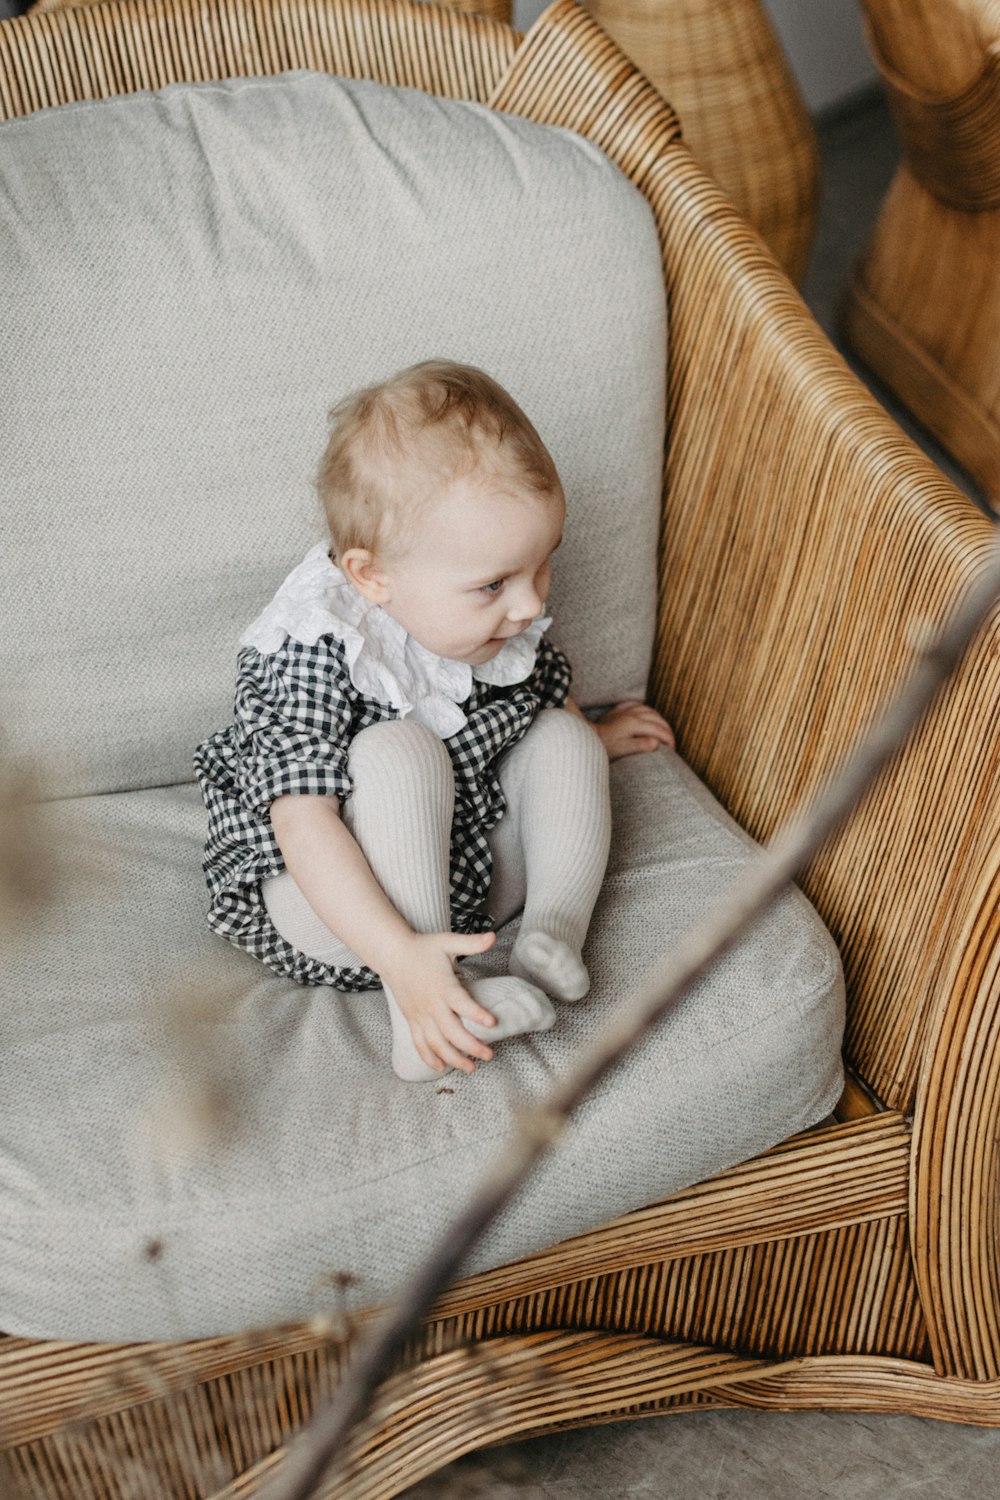 a baby sitting in a wicker chair